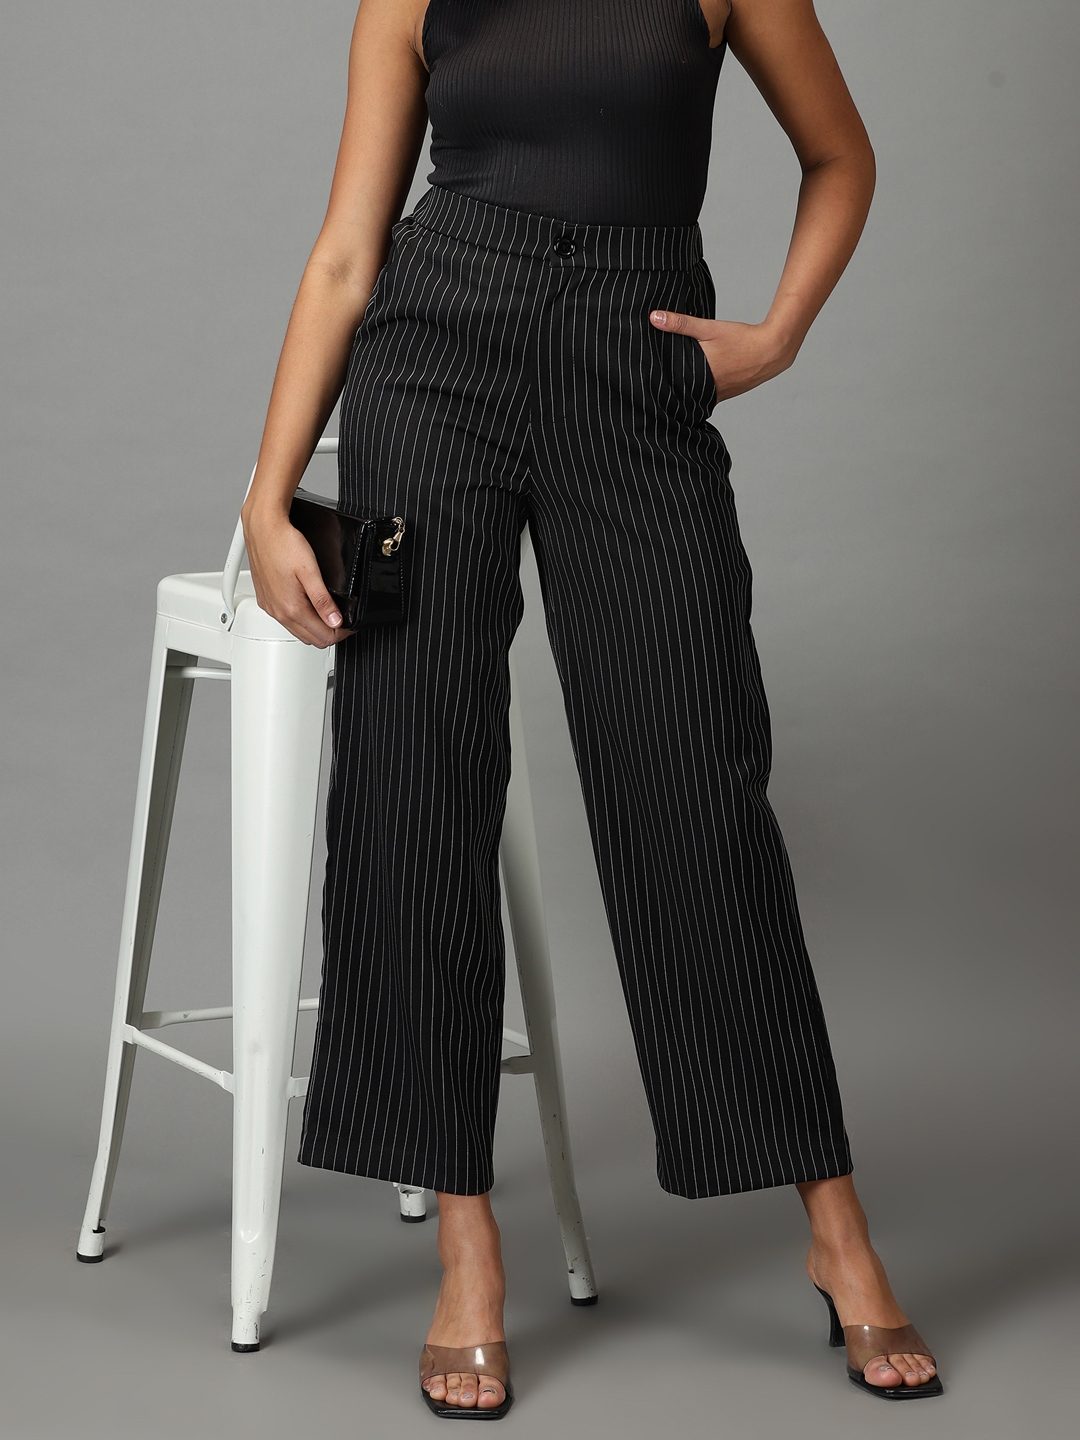 Buy Womens Black  White Striped Lounge Pants Online in India at Bewakoof